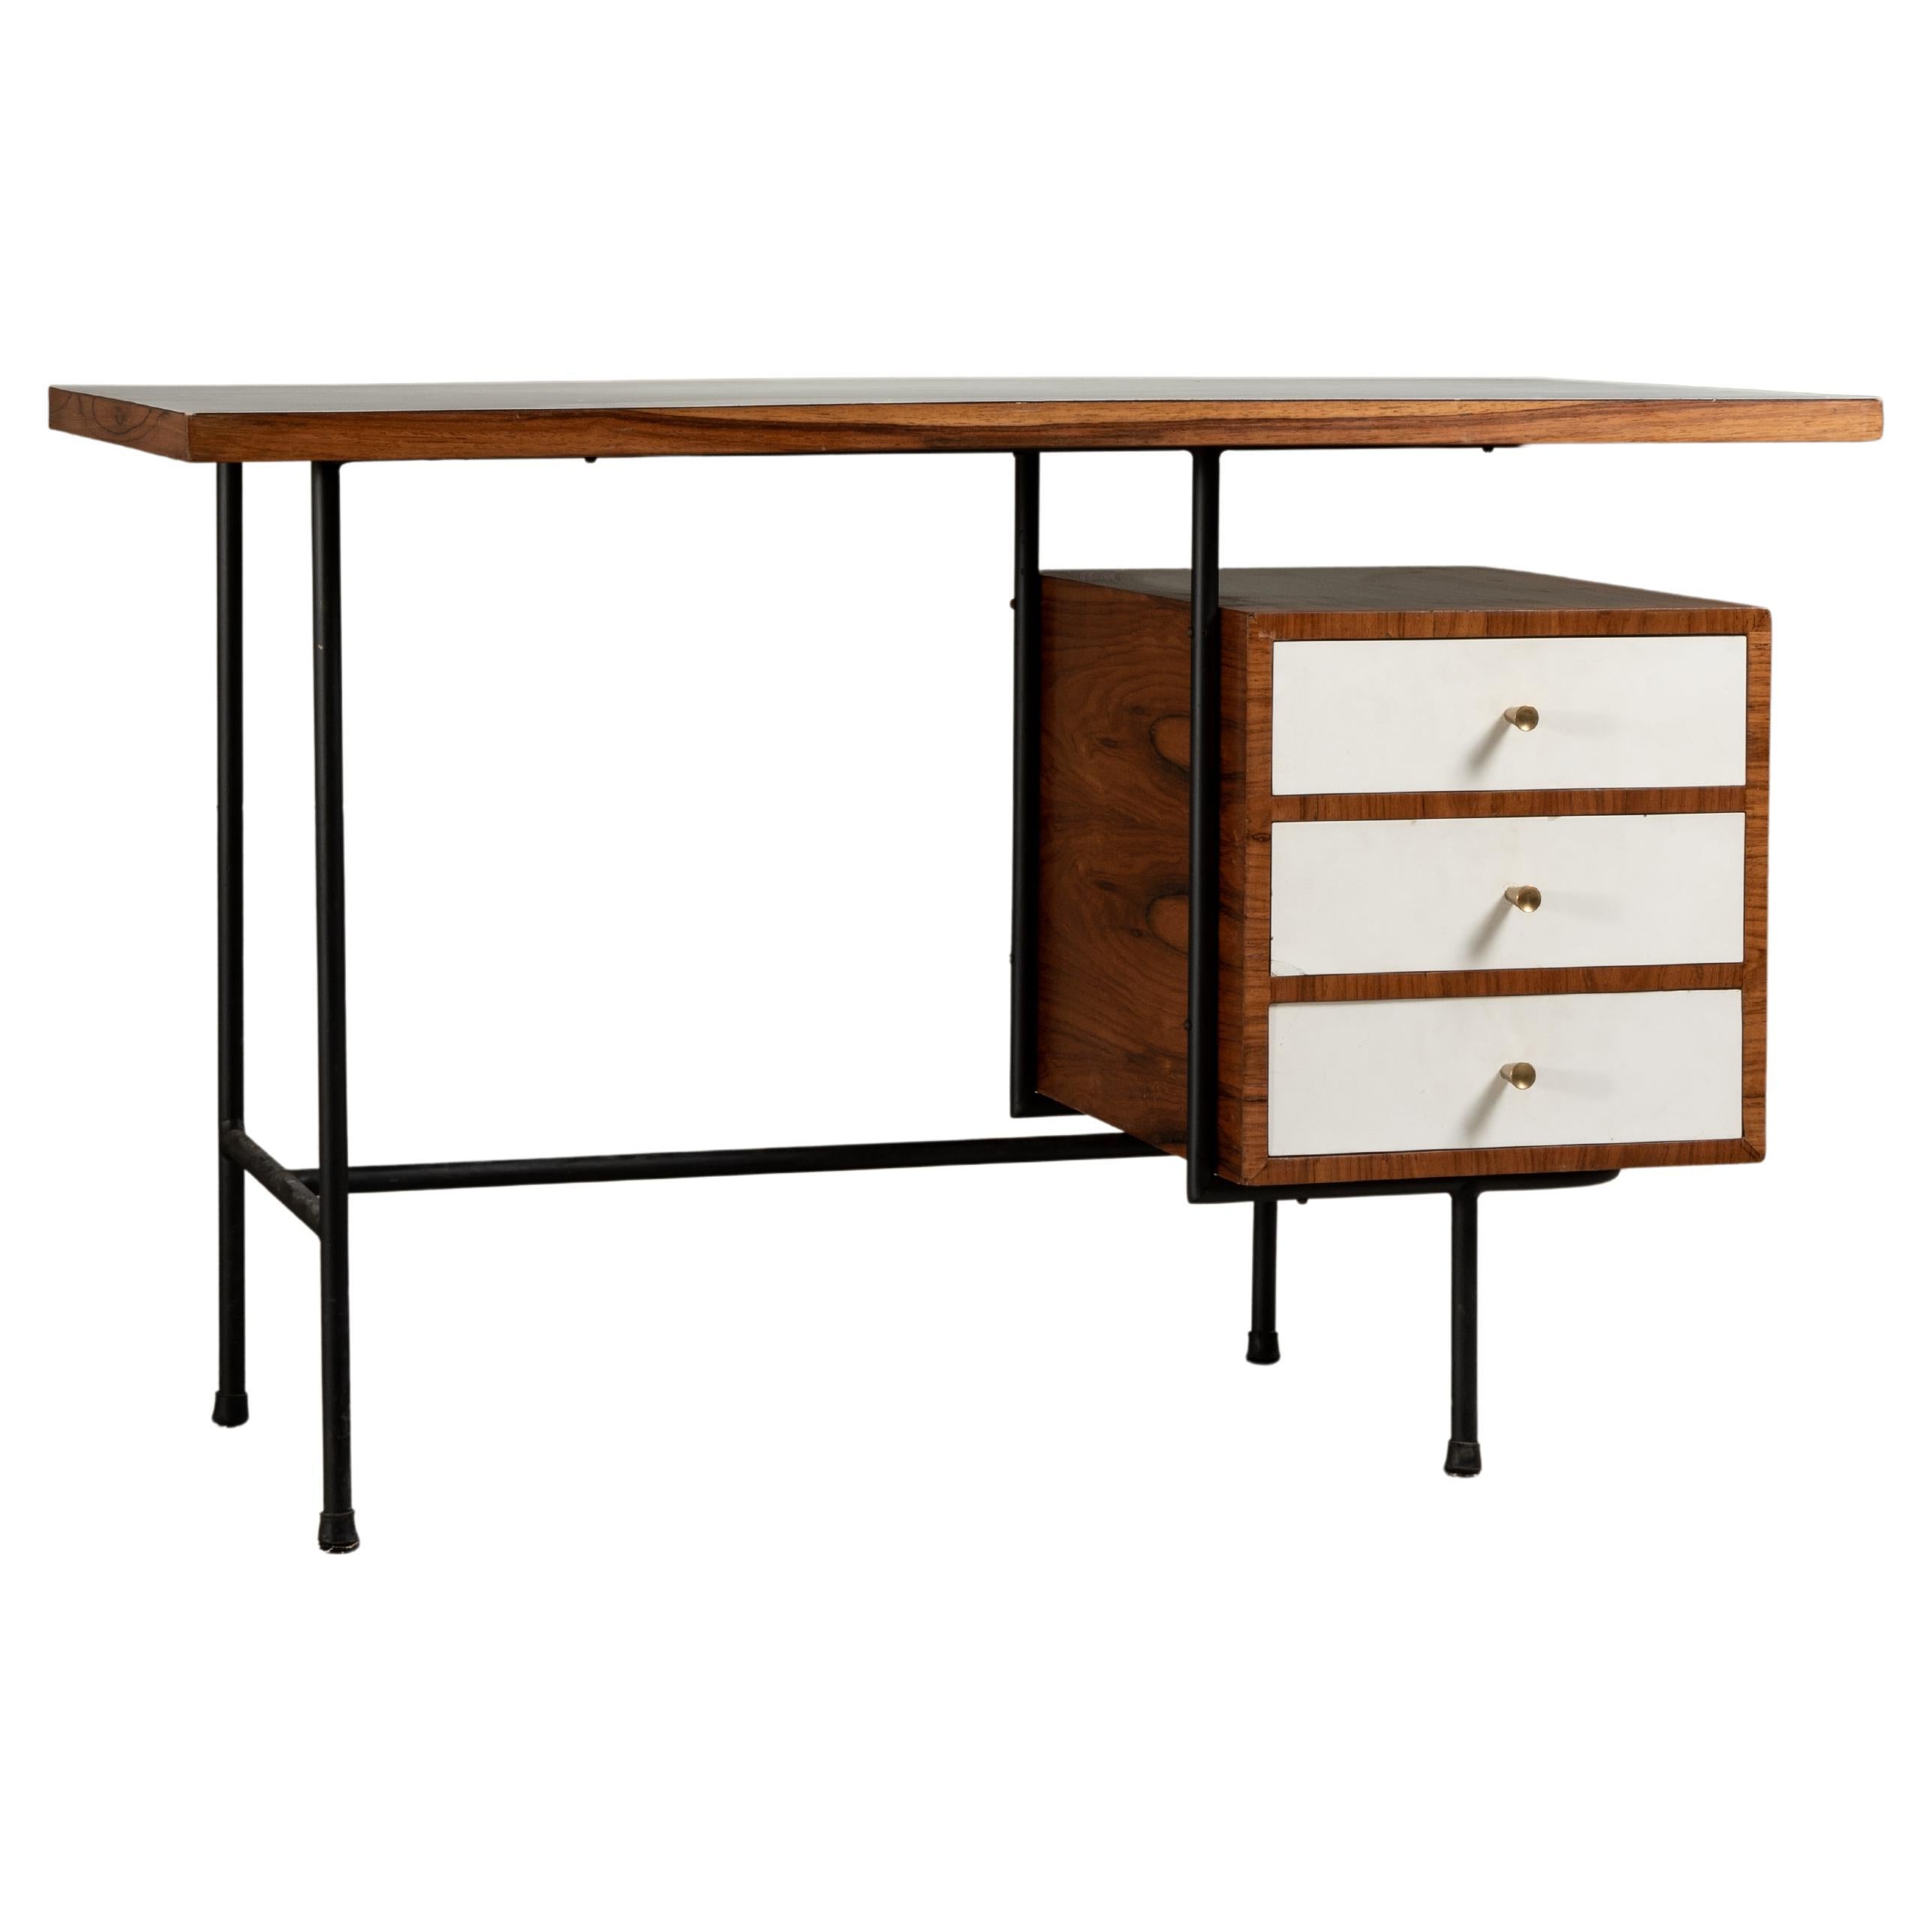 Architectural Desk in Iron and Wood, by Unilabor, Brazilian Mid-Century Modern  